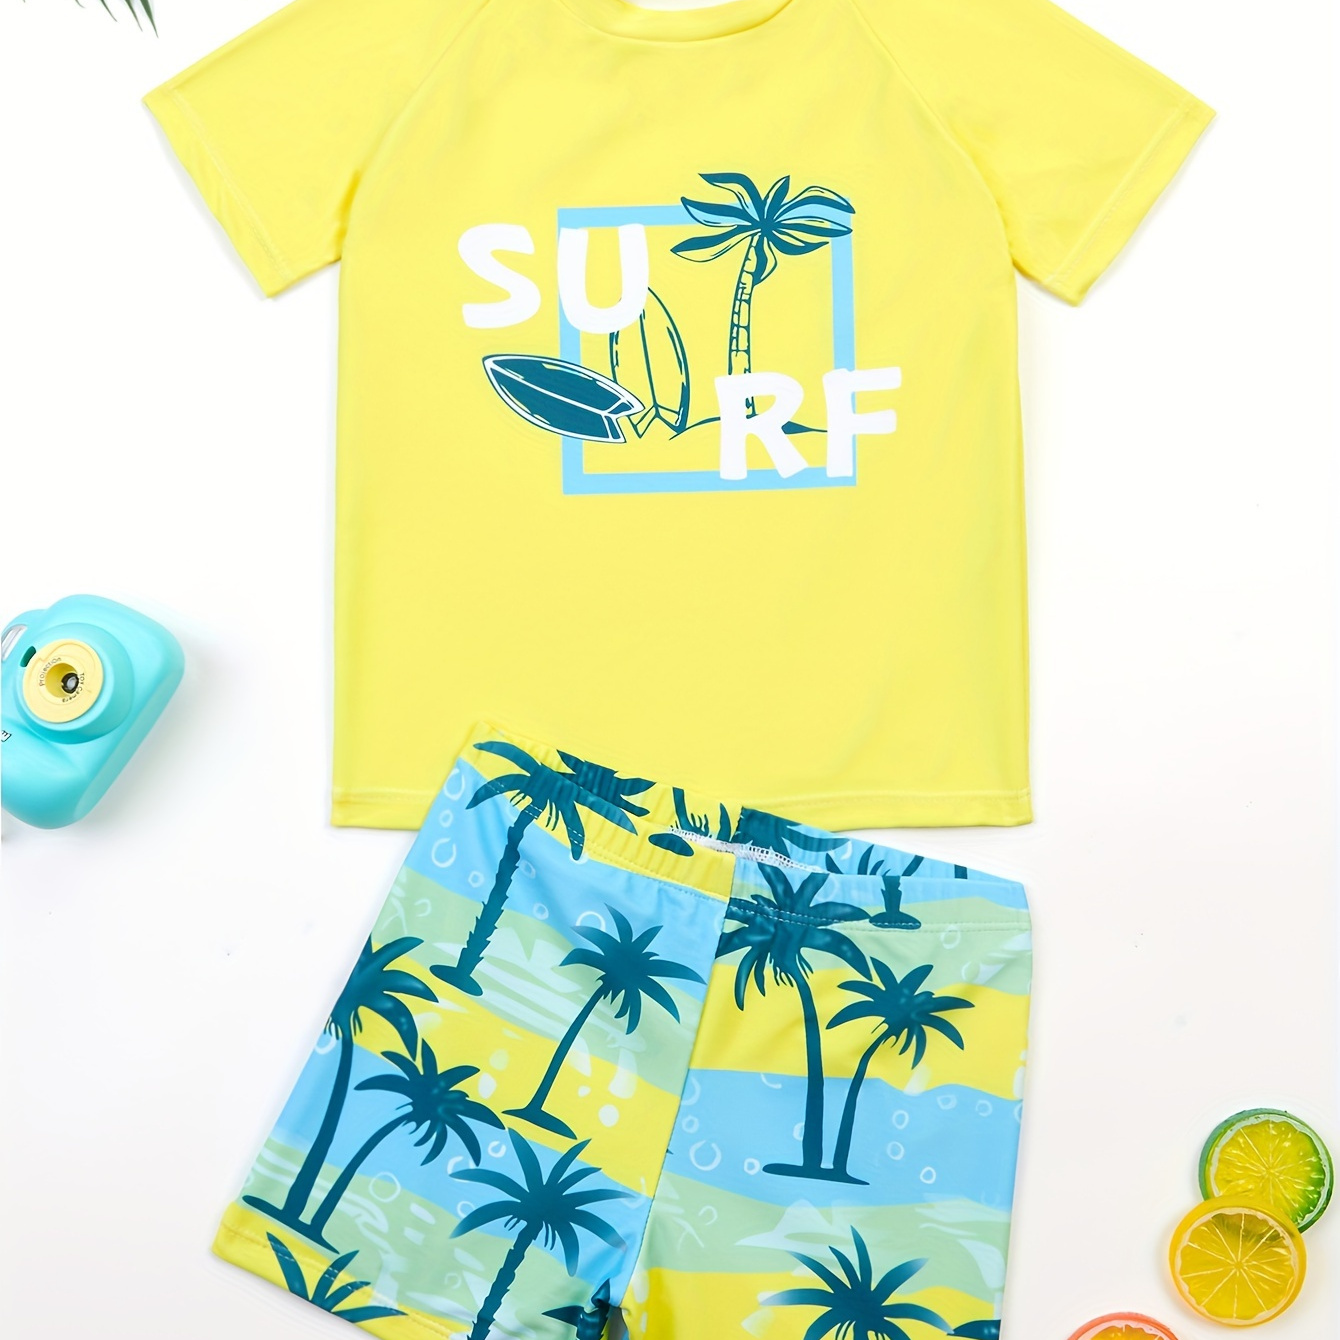 

2pcs Coconut Tree Pattern Swimsuit For Boys, T-shirt & Swim Trunks Set, Stretchy Surfing Suit, Boys Swimwear For Summer Beach Vacation